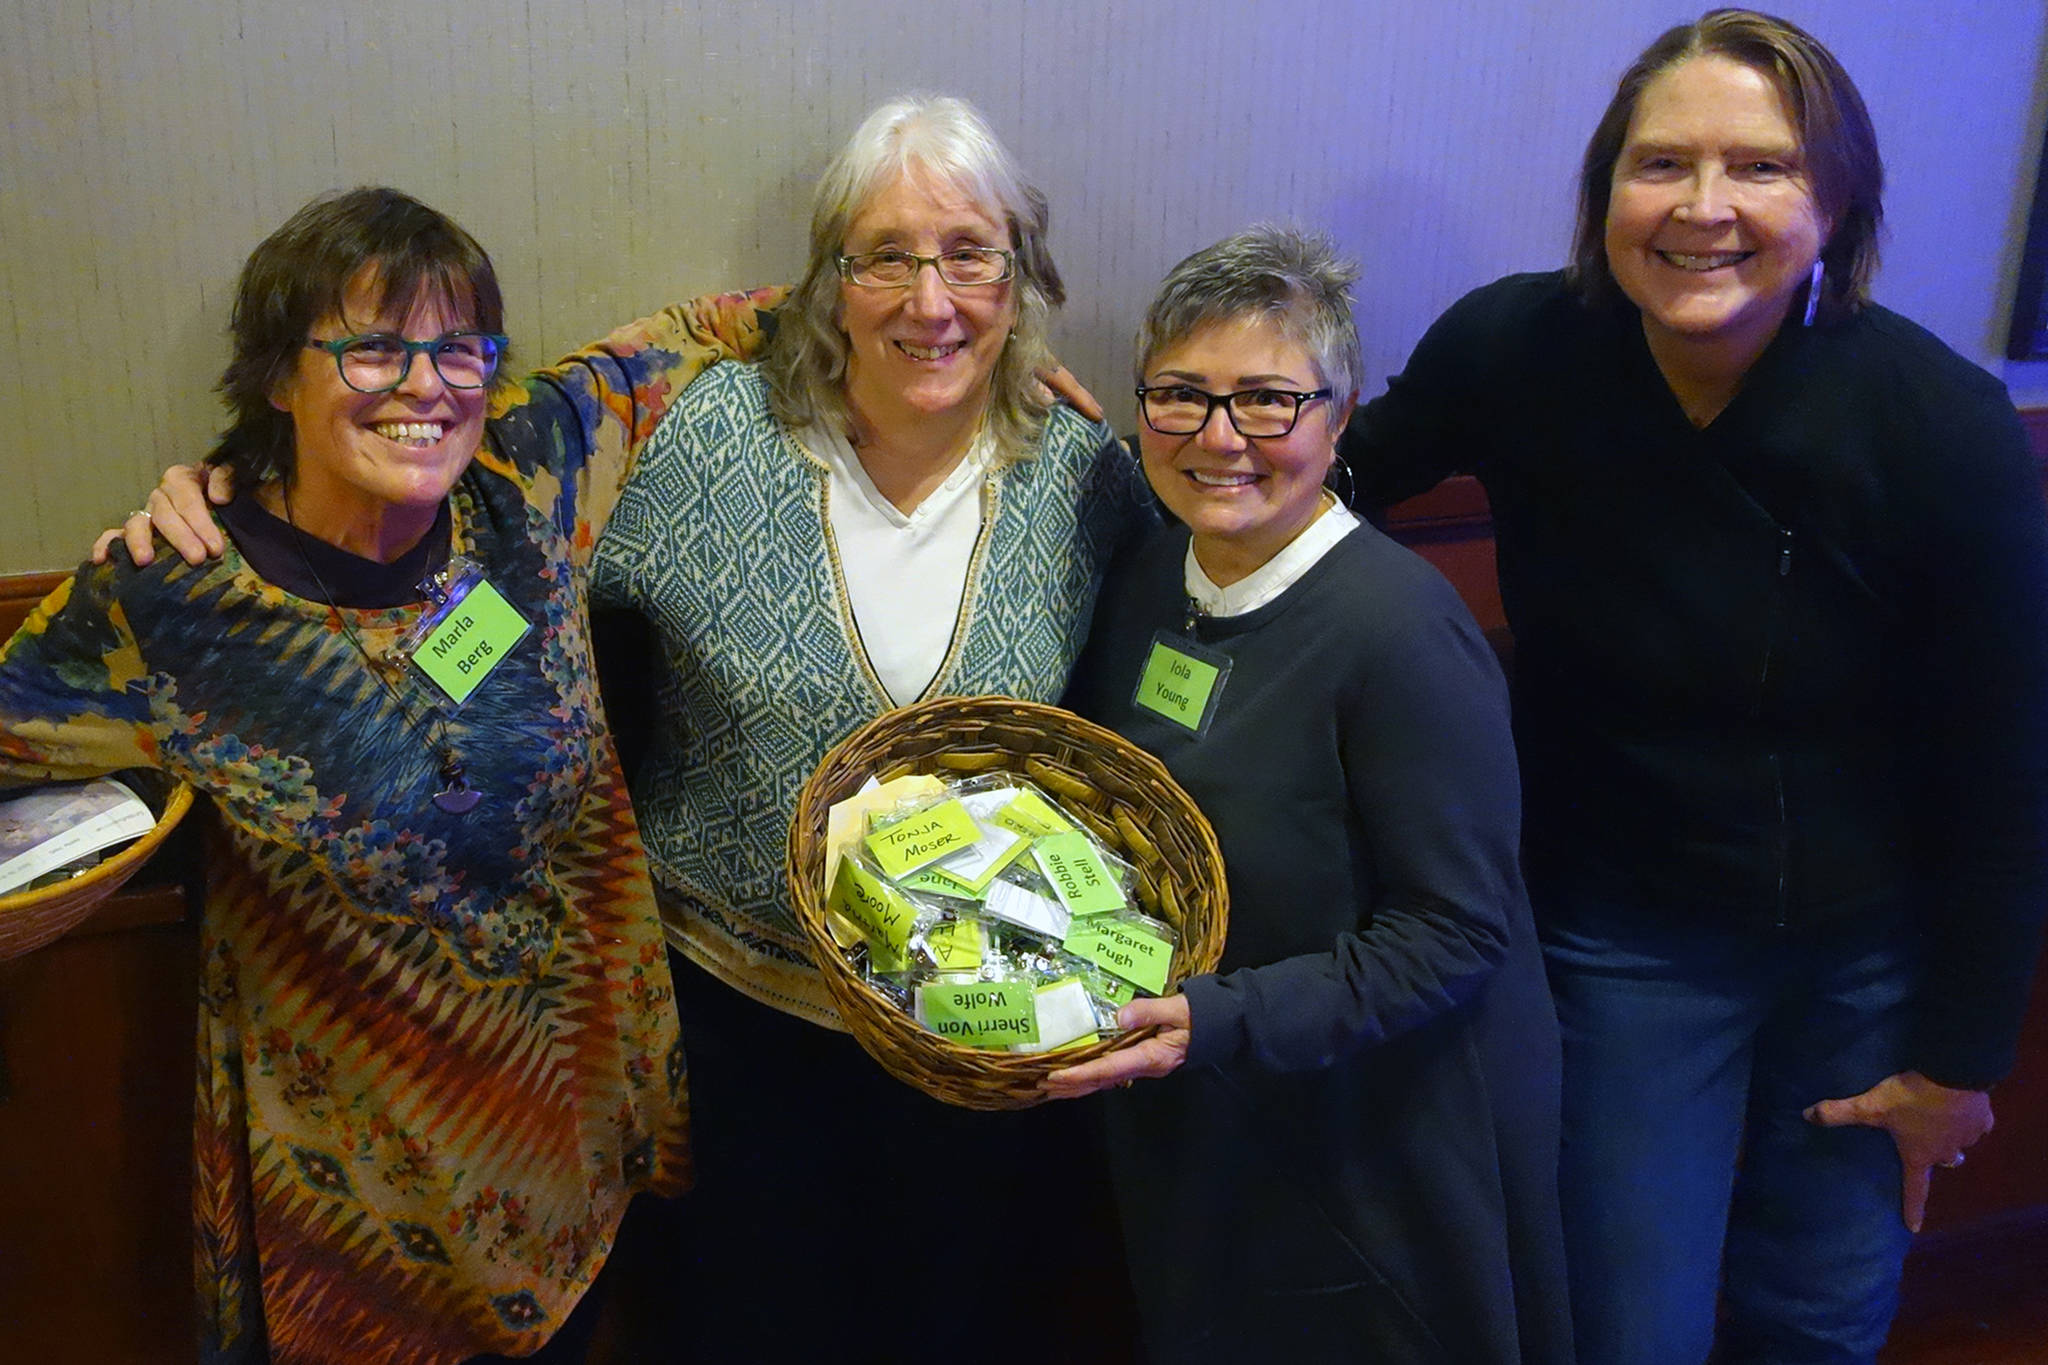 Marla Berg, organizing committee member for 100 Women Who Care Juneau; Kate Troll, who pitched the idea of donating to Renewable Juneau; Iola Young, organizing committee member for 100 Women Who Care Juneau; and Jane Lindsey, organizing committee member for 100 Women Who Care Juneau; smile with baskets filled with name tags and checks at the Hangar Ballroom, Thursday, Jan. 16, 2020. (Ben Hohenstatt | Juneau Empire)